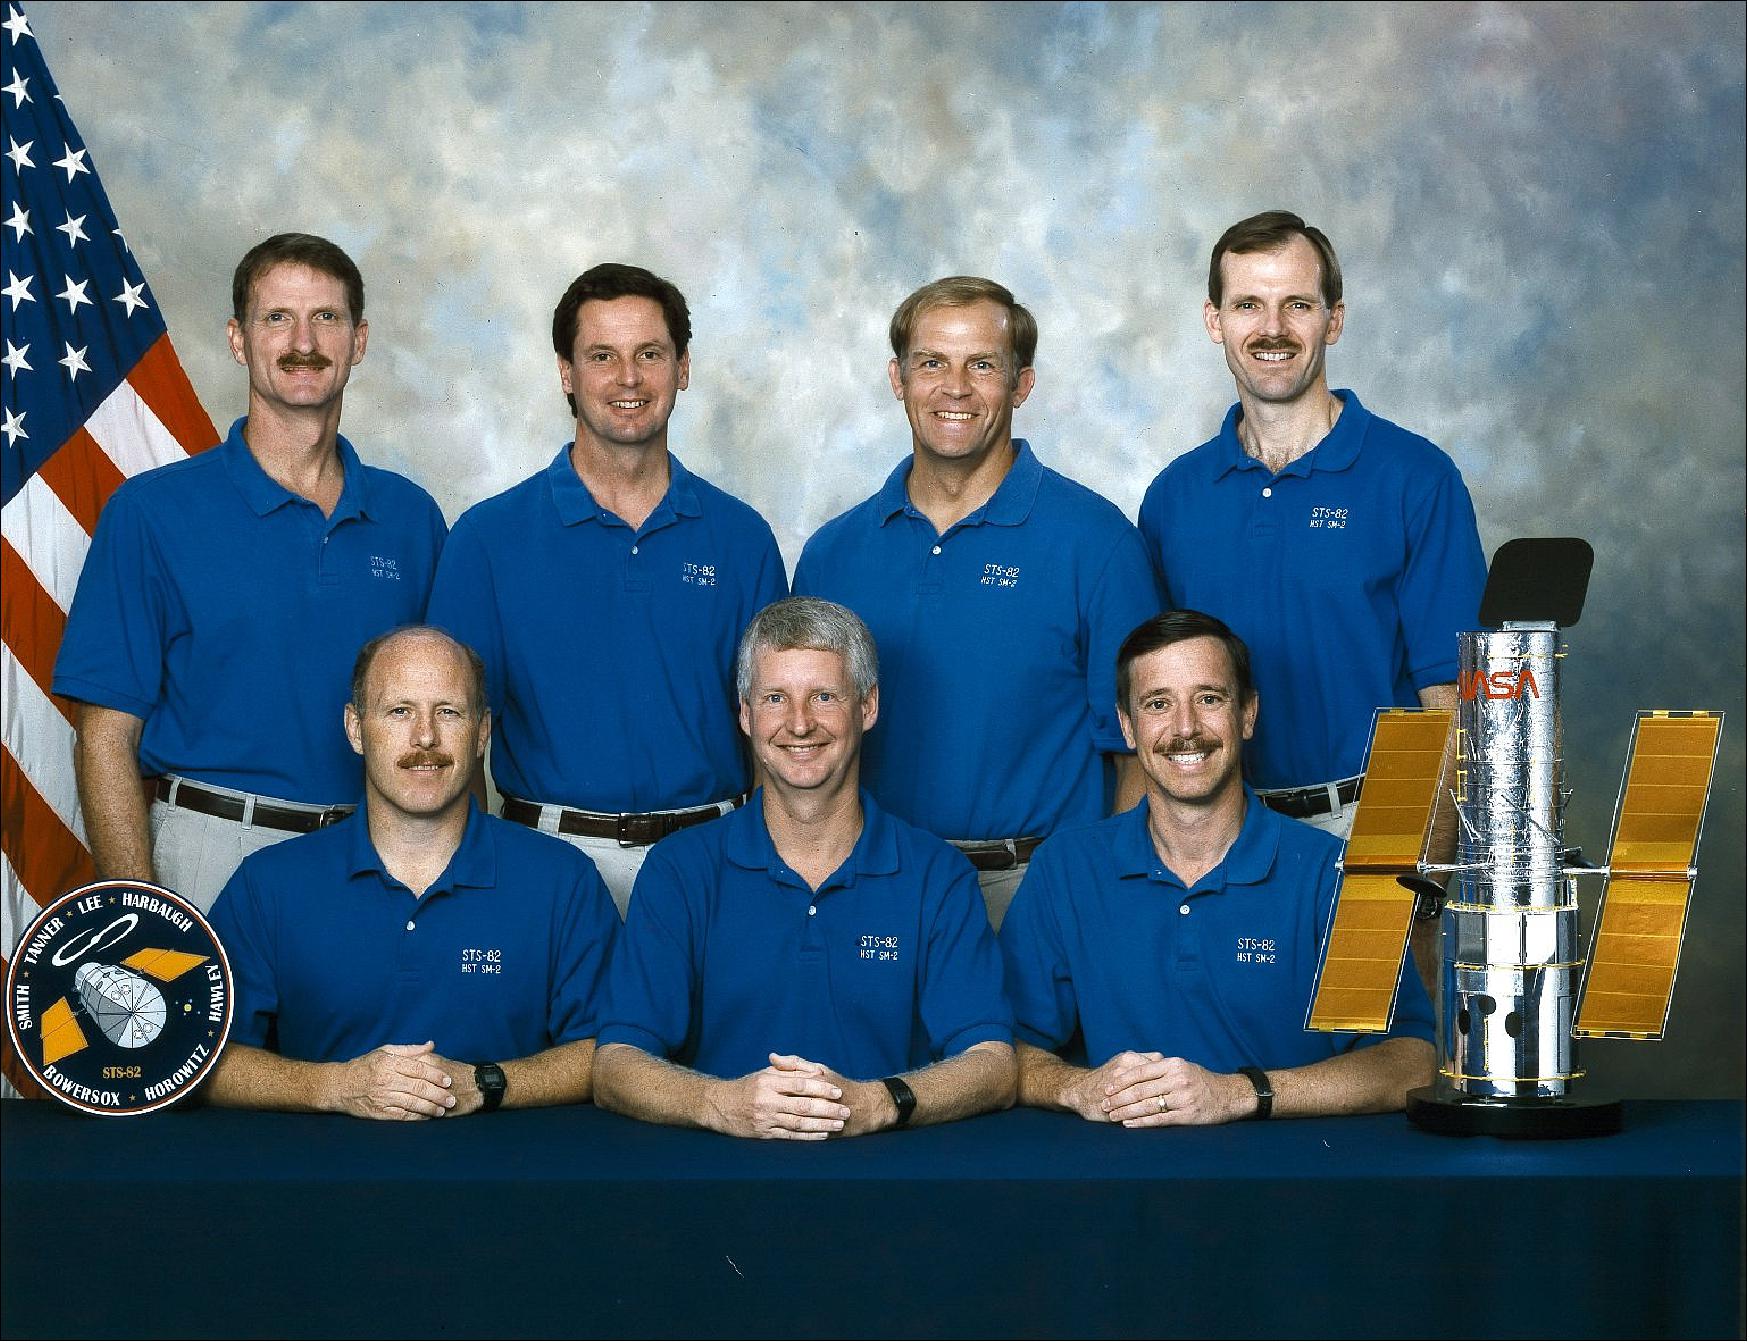 Figure 57: STS-82 Crew photo with Commander Kenneth D. Bowersox, Pilot Scott J. Horowitz, Mission Specialists Mark C. Lee, Steven A.Hawley, Gregory J. Harbaugh, Steven L. Smith and Joseph R. Tanner (image credit: NASA)